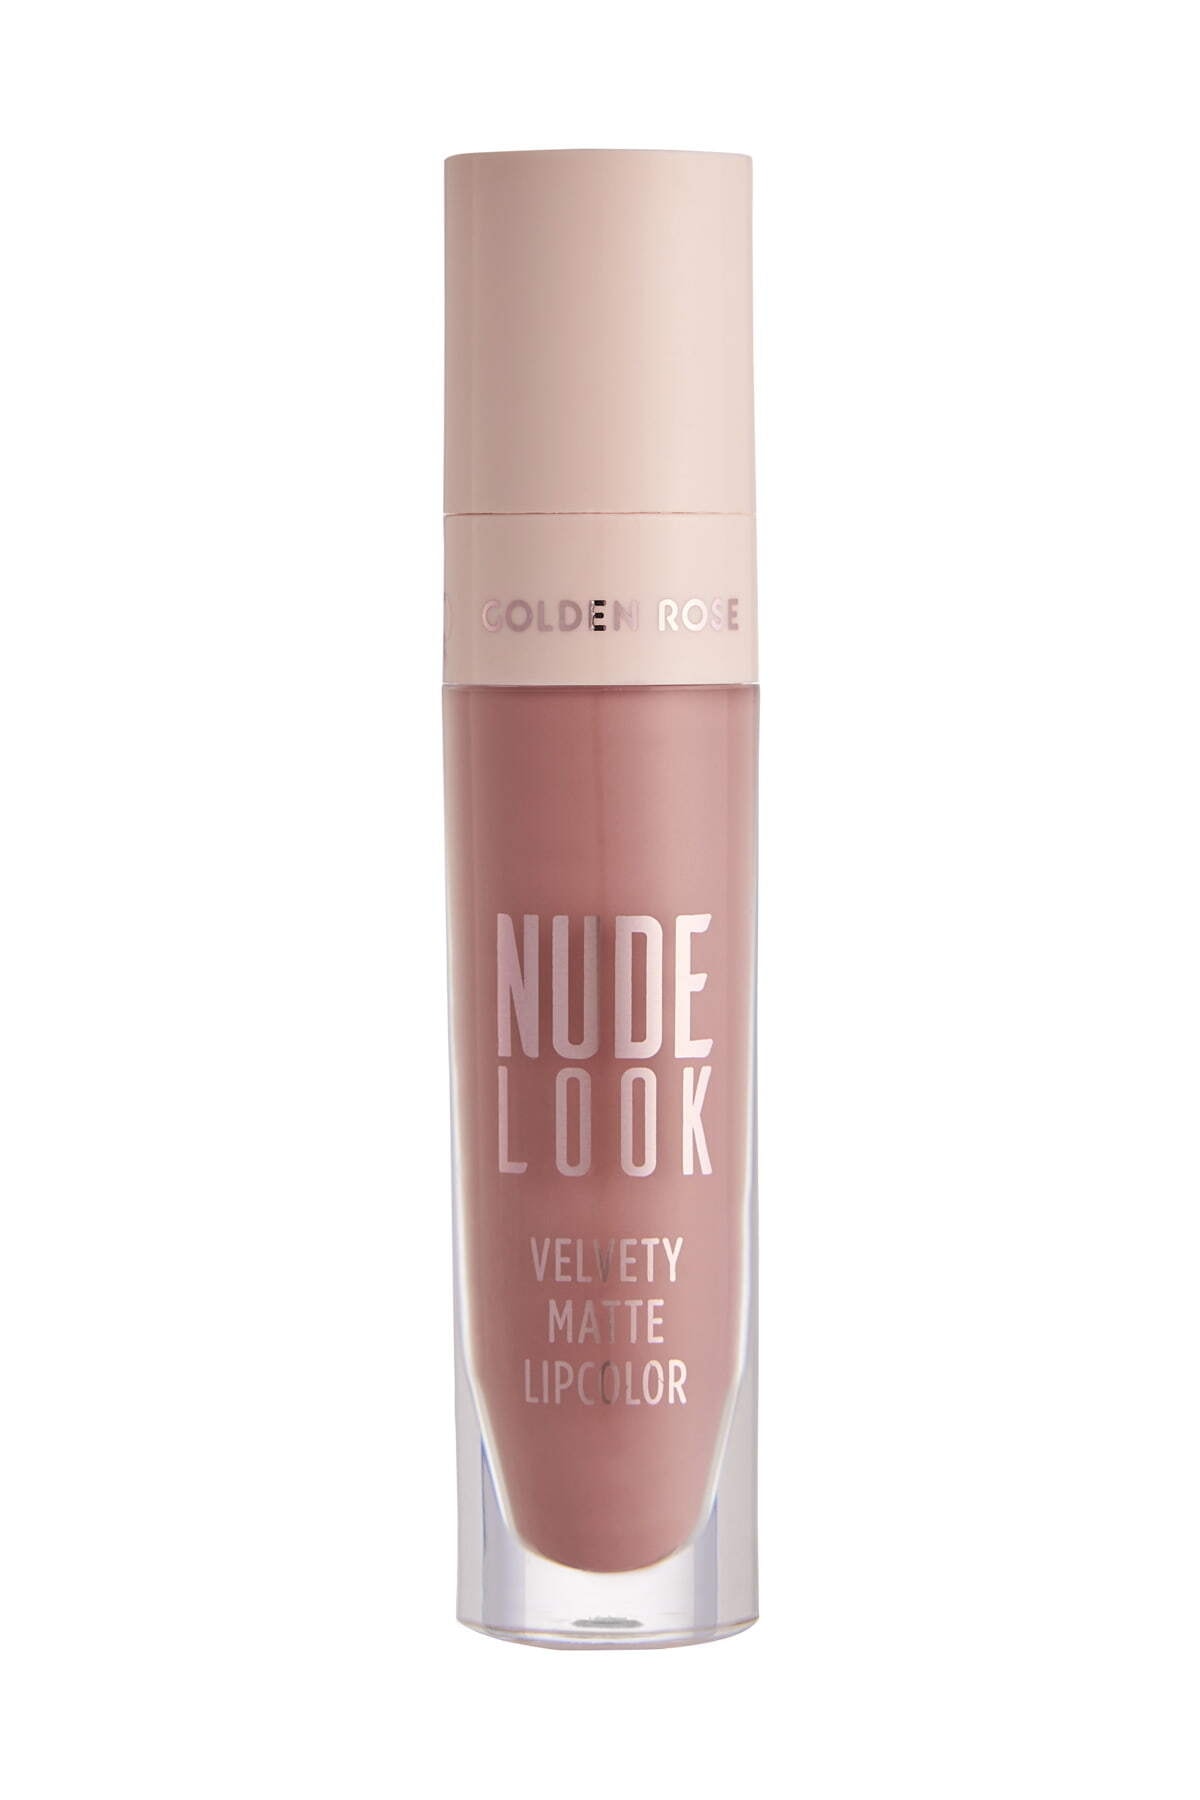 Golden Rose Likit Mat Ruj - Nude Look Velvety Matte Lipcolor No: 03 Rosy Nude 8691190967468